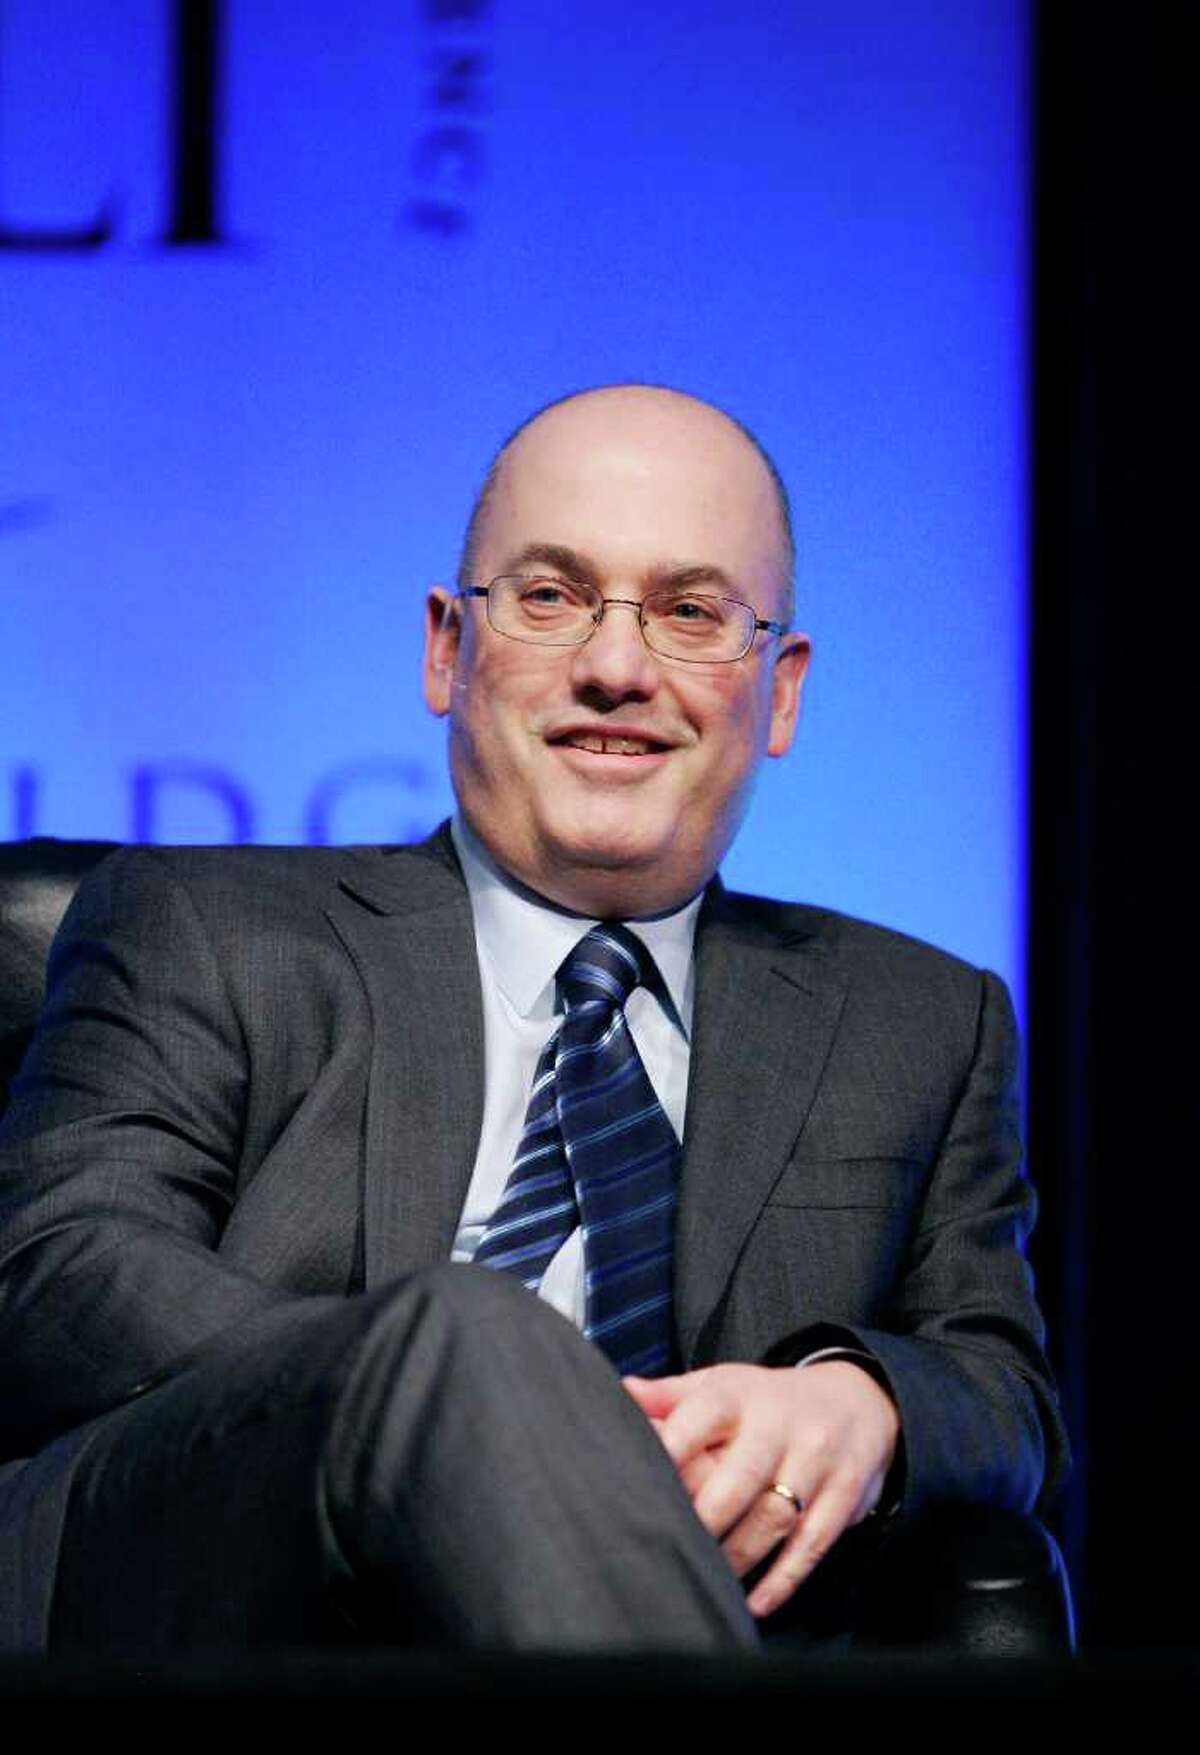 Steven Cohen, founder and chief executive officer of SAC Capital Advisors LP, speaks during the SkyBridge Alternatives (SALT) conference in Las Vegas, Nevada, U.S., on Wednesday, May 11, 2011. Photographer: Ronda Churchill/Bloomberg *** Local Caption *** Steven Cohen